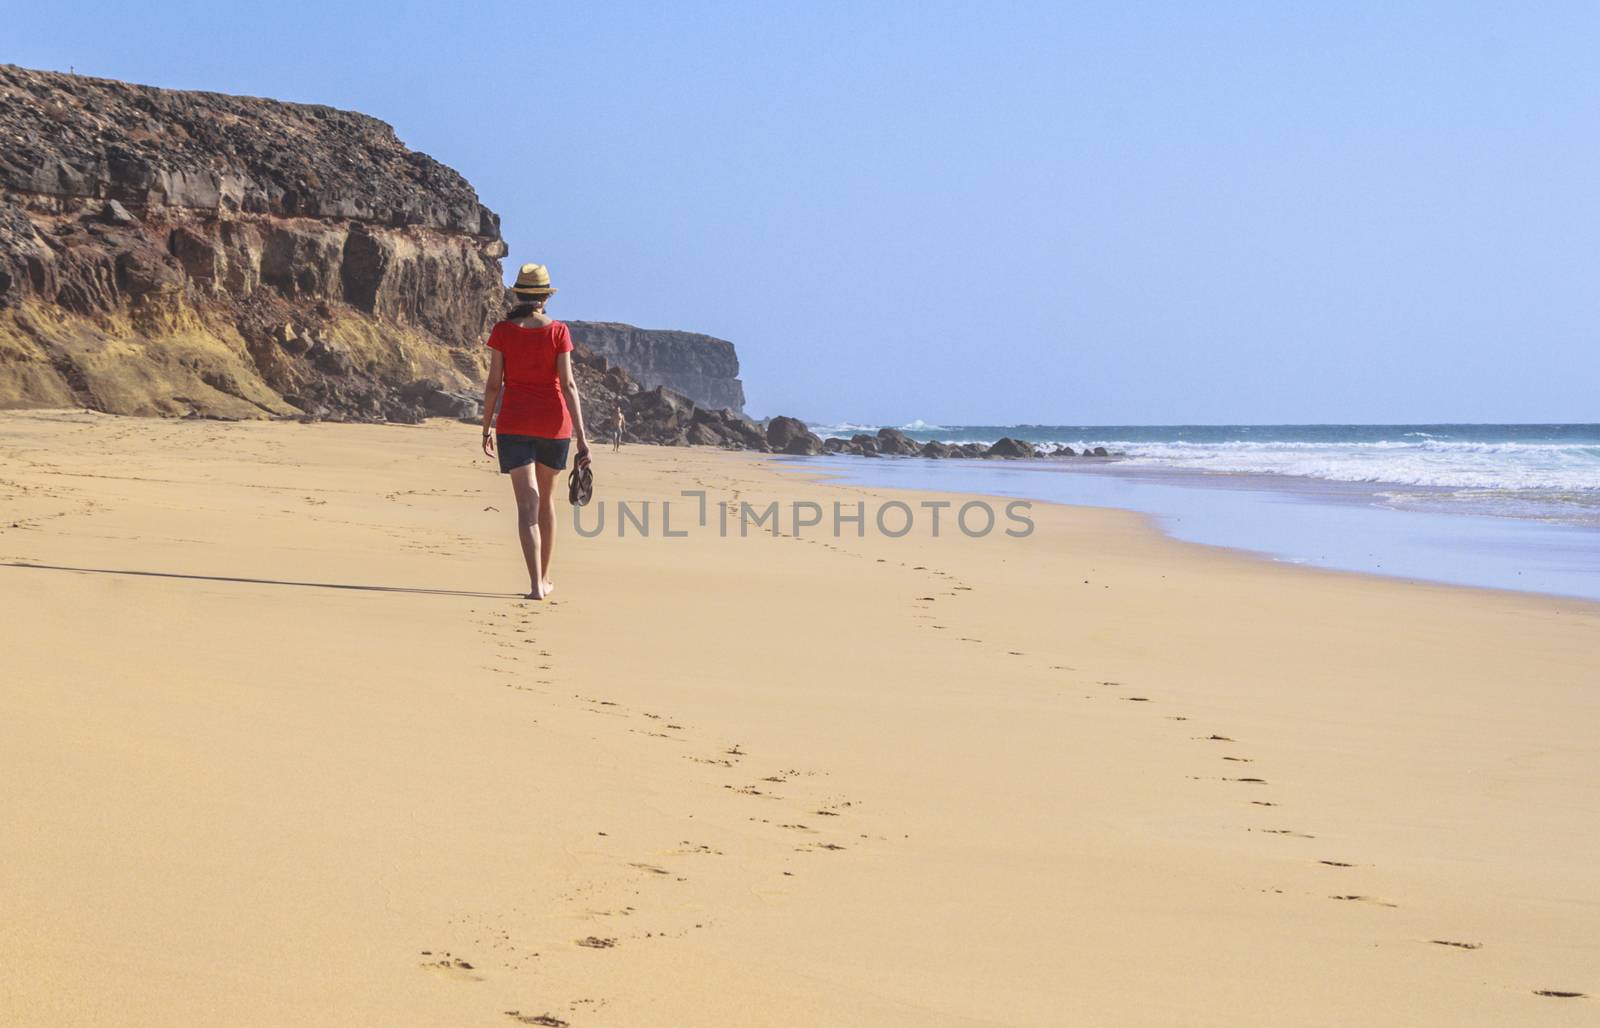 Lonely girl walking in a solitary beach. Image with many copy space available.